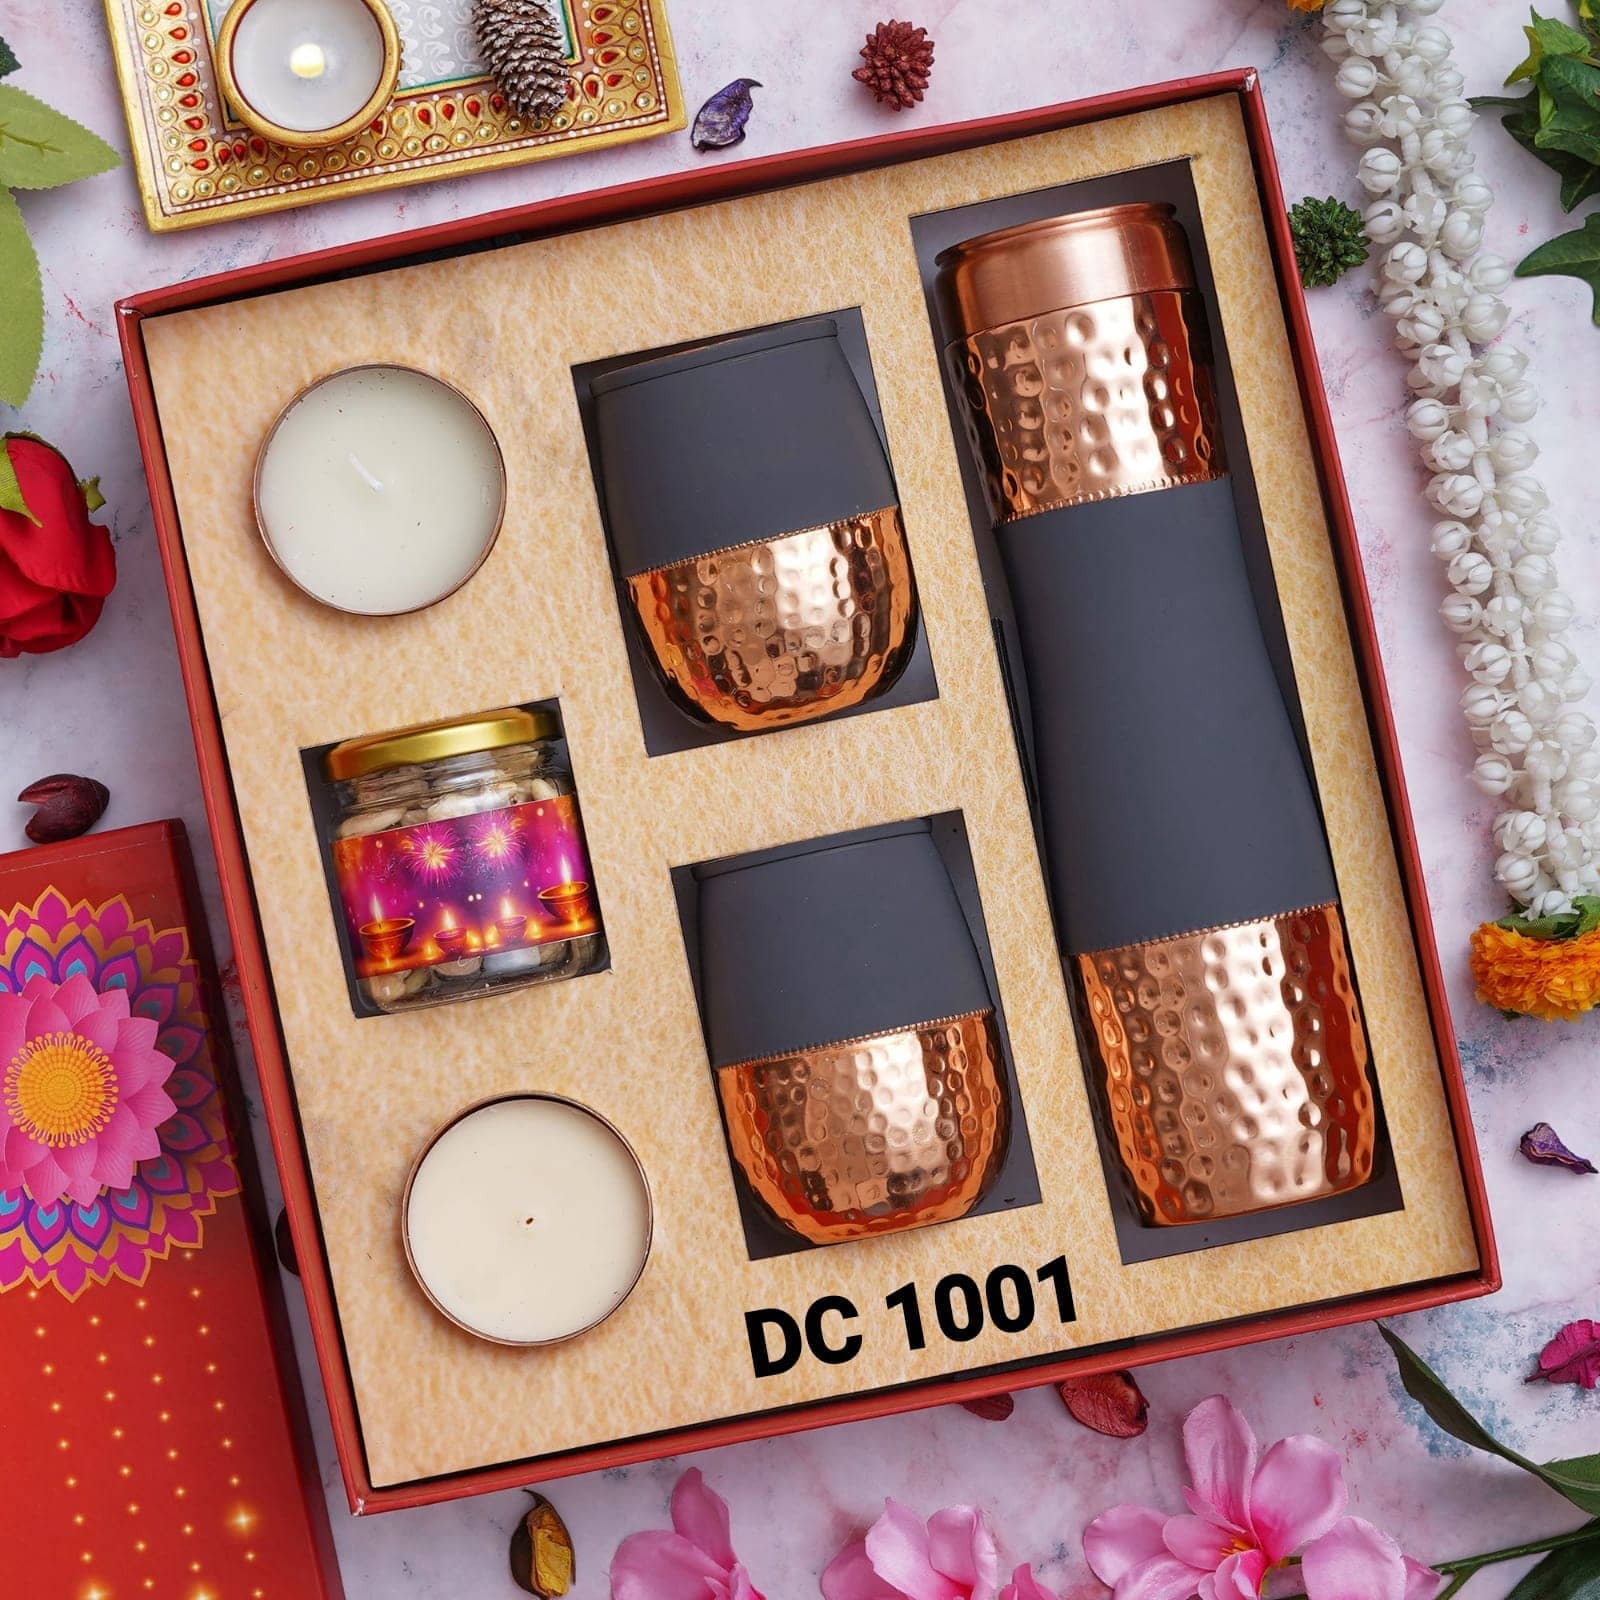 Eco-friendly and Thoughtful Diwali Gift Ideas to Light Up Hearts and Planet